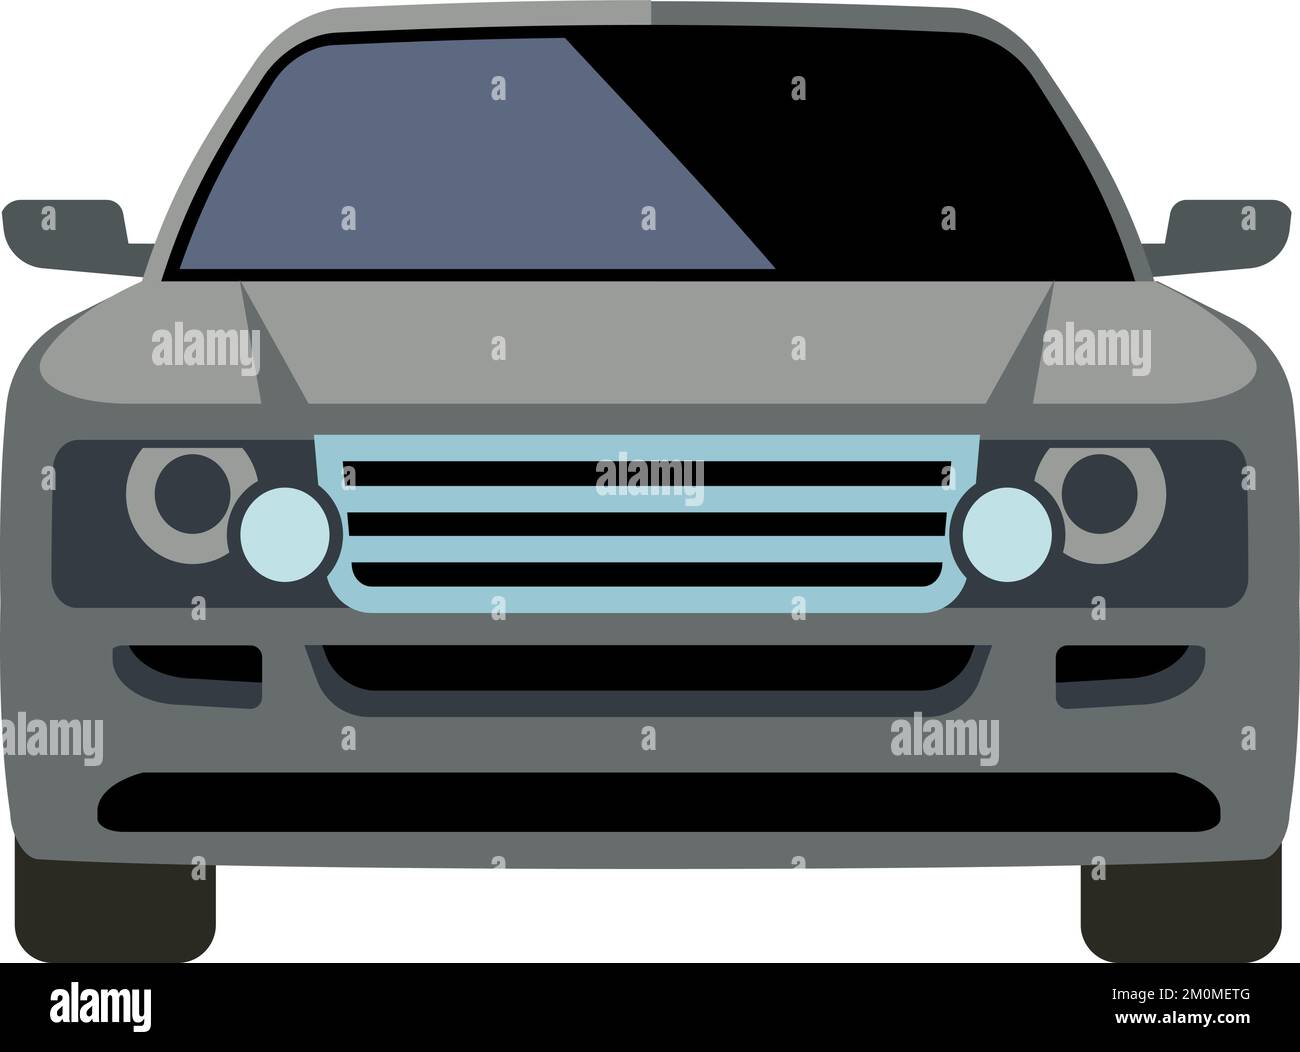 Suv front view. Travel car cartoon icon Stock Vector